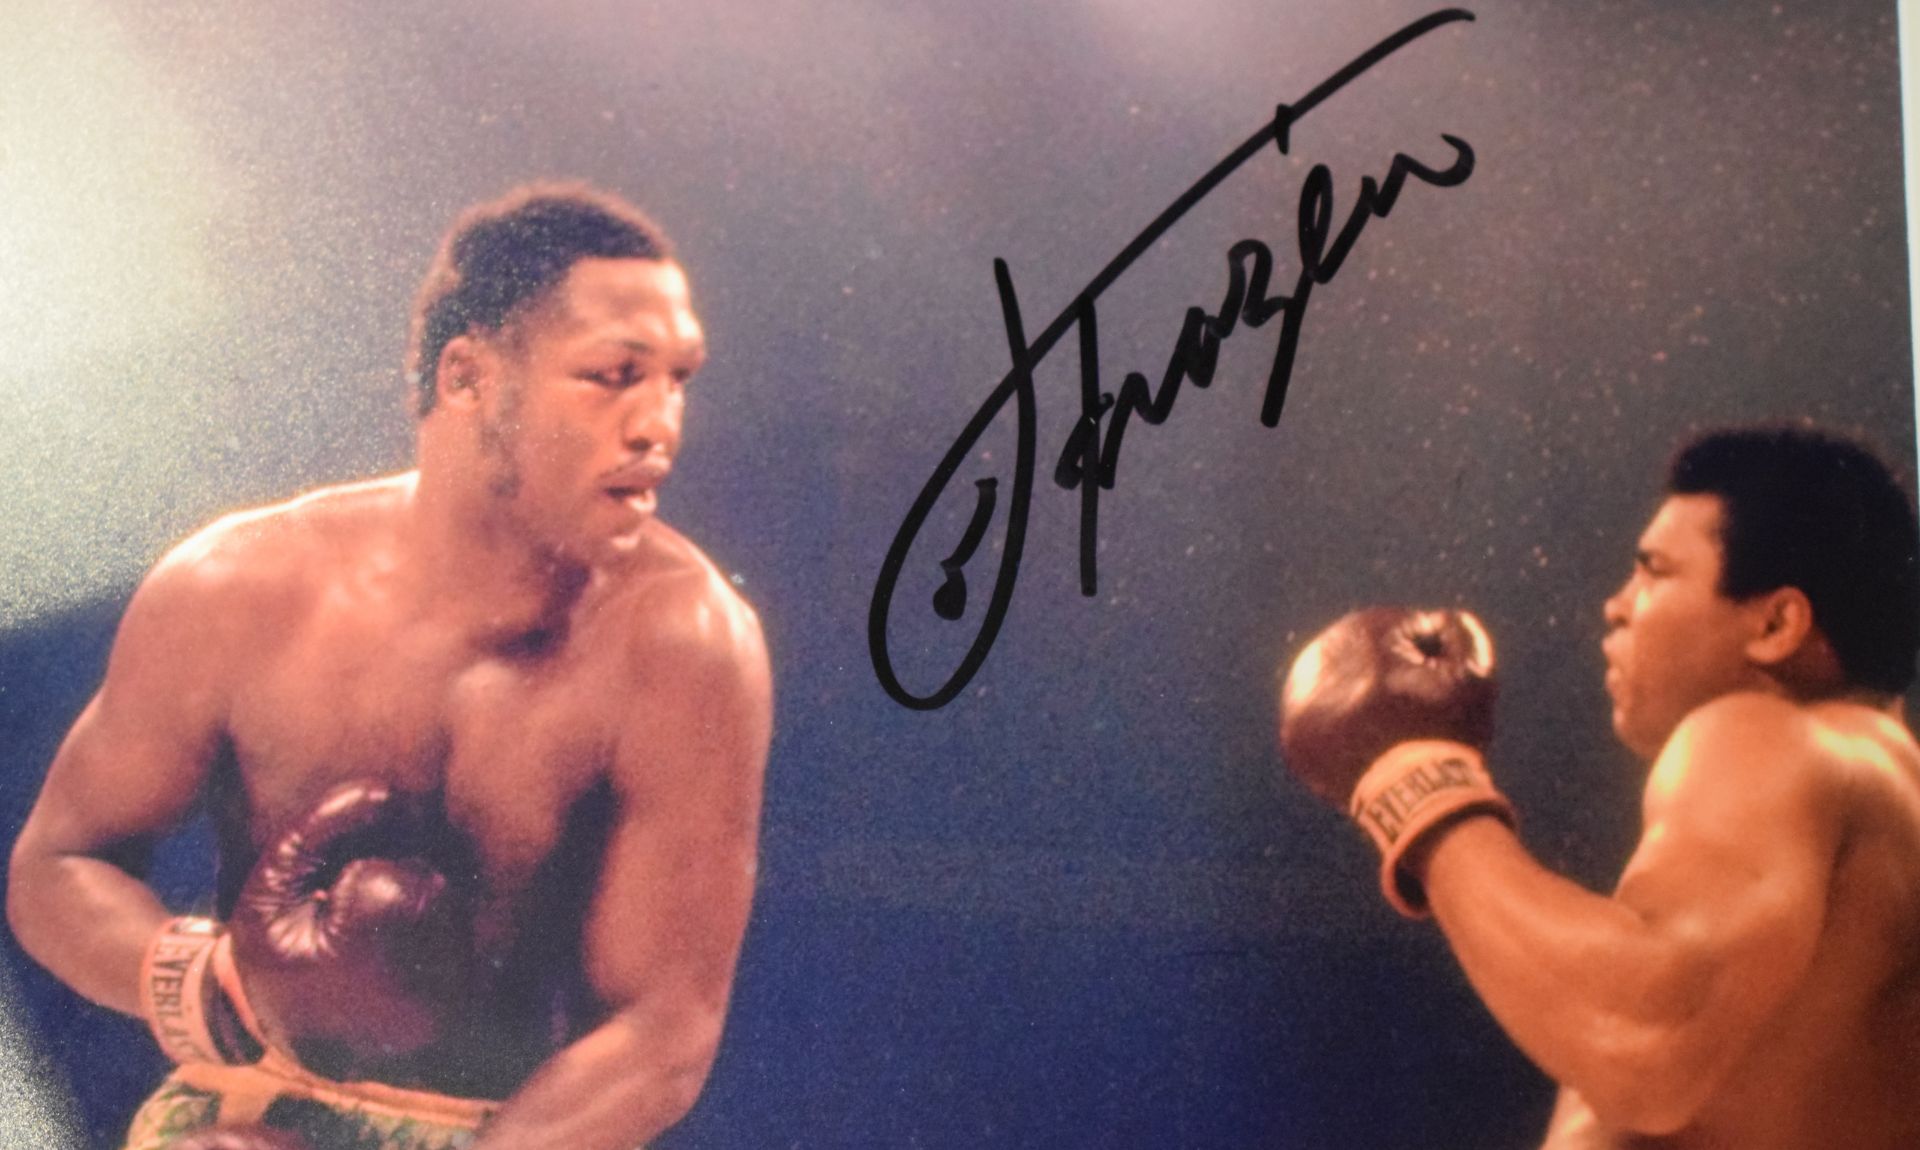 Excellent Signed Photograph of Joe Frazier knocking down Ali in 'The Fight Of The Century' - Image 2 of 5